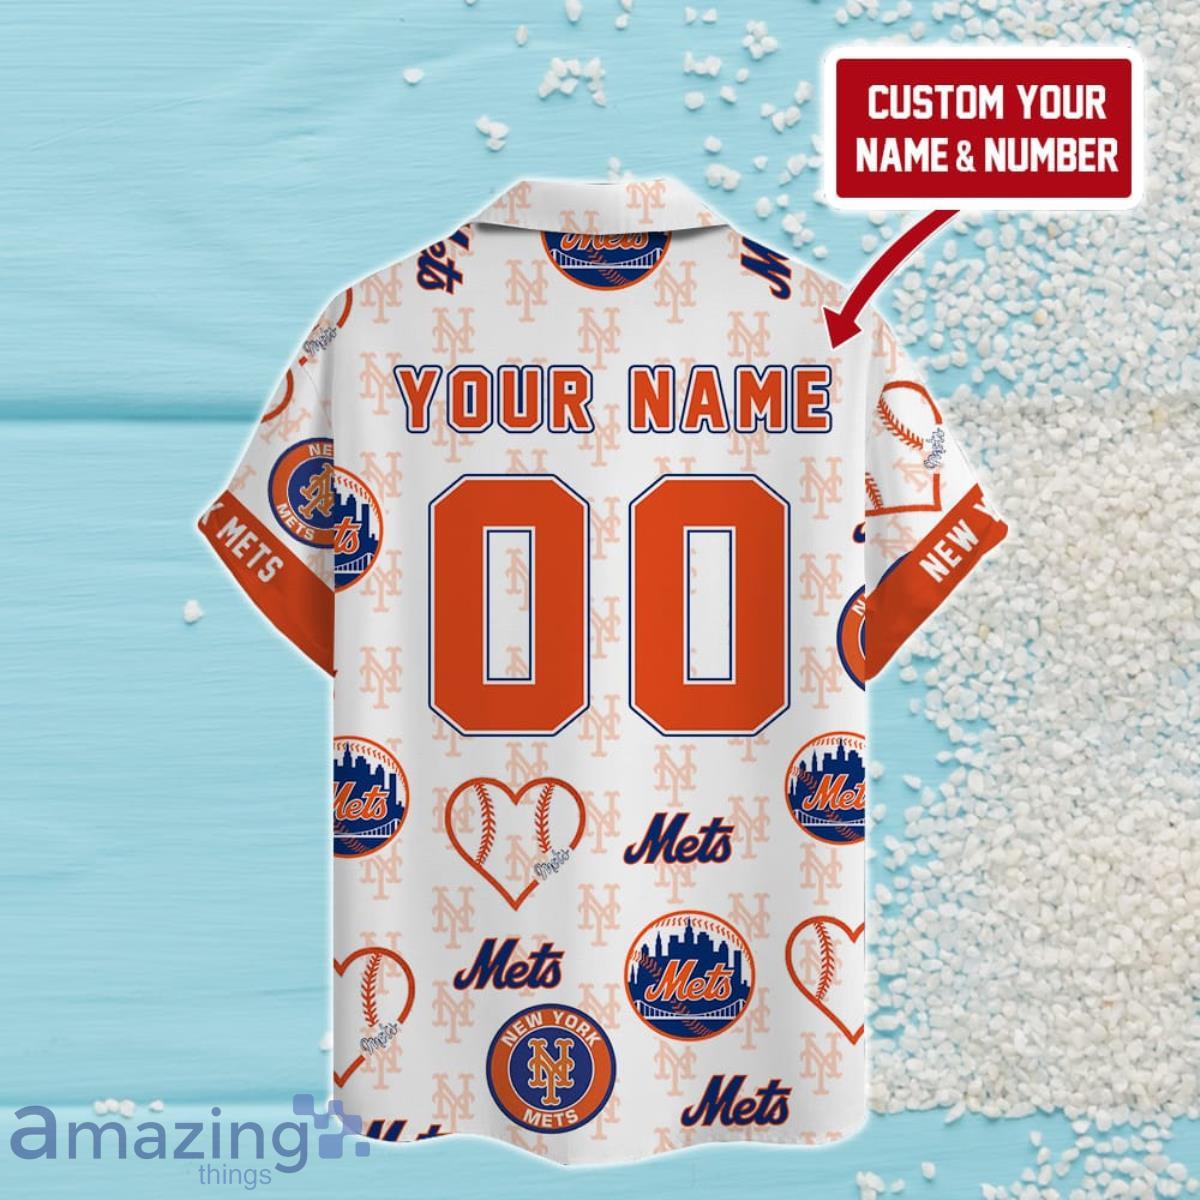 New York Mets Personalized Jerseys Customized Shirts with Any Name